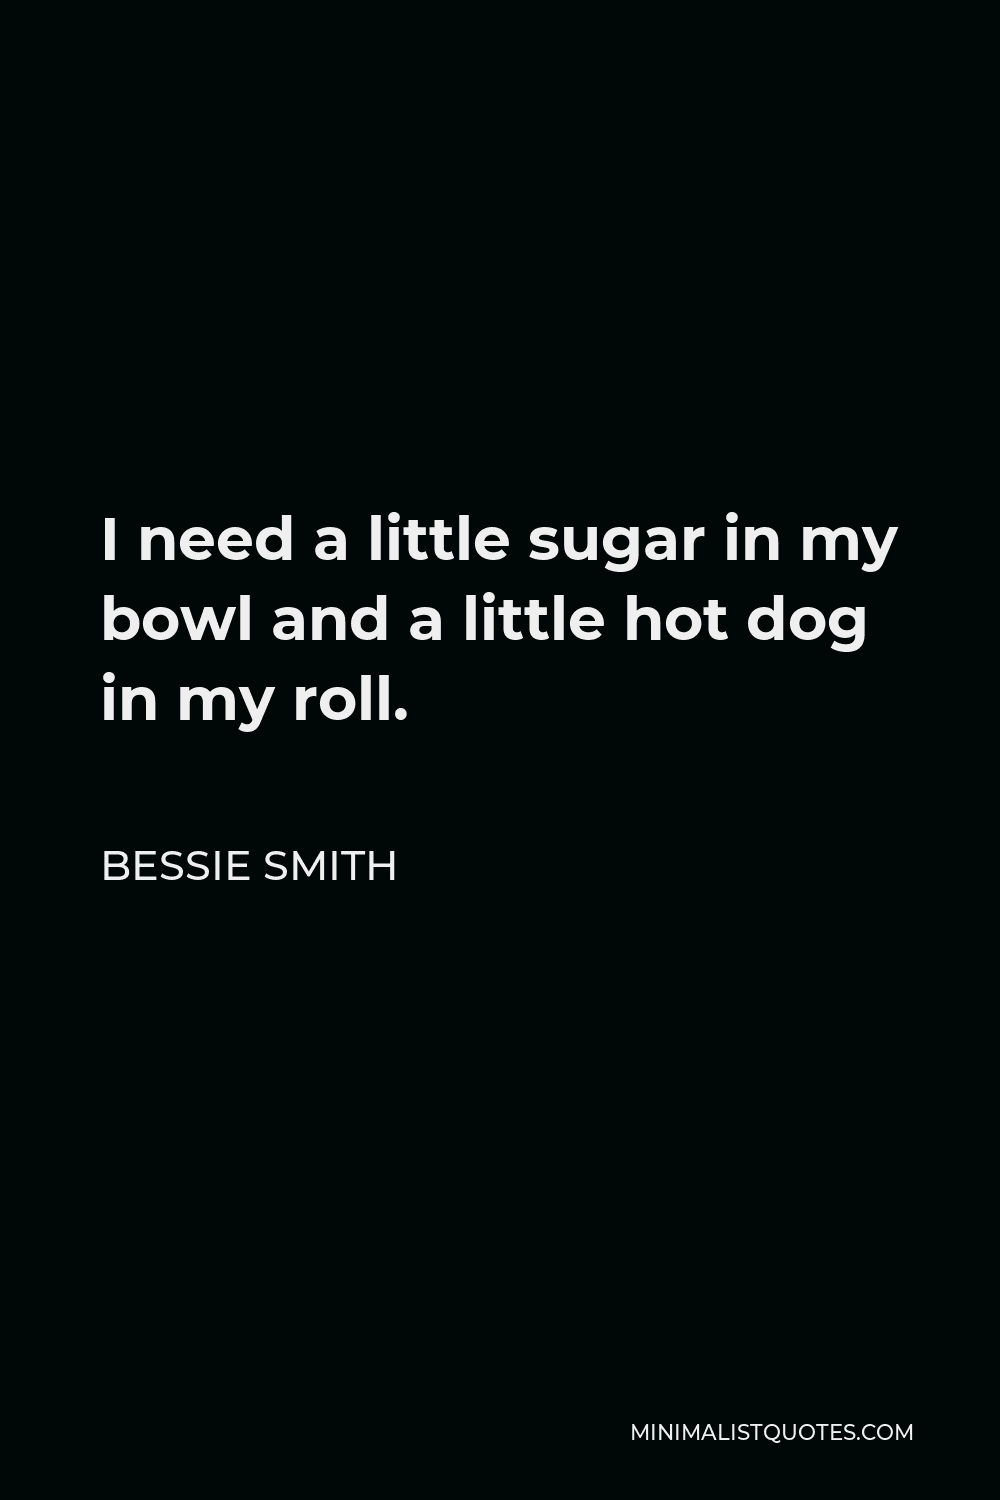 Bessie Smith Quote - I need a little sugar in my bowl and a little hot dog in my roll.